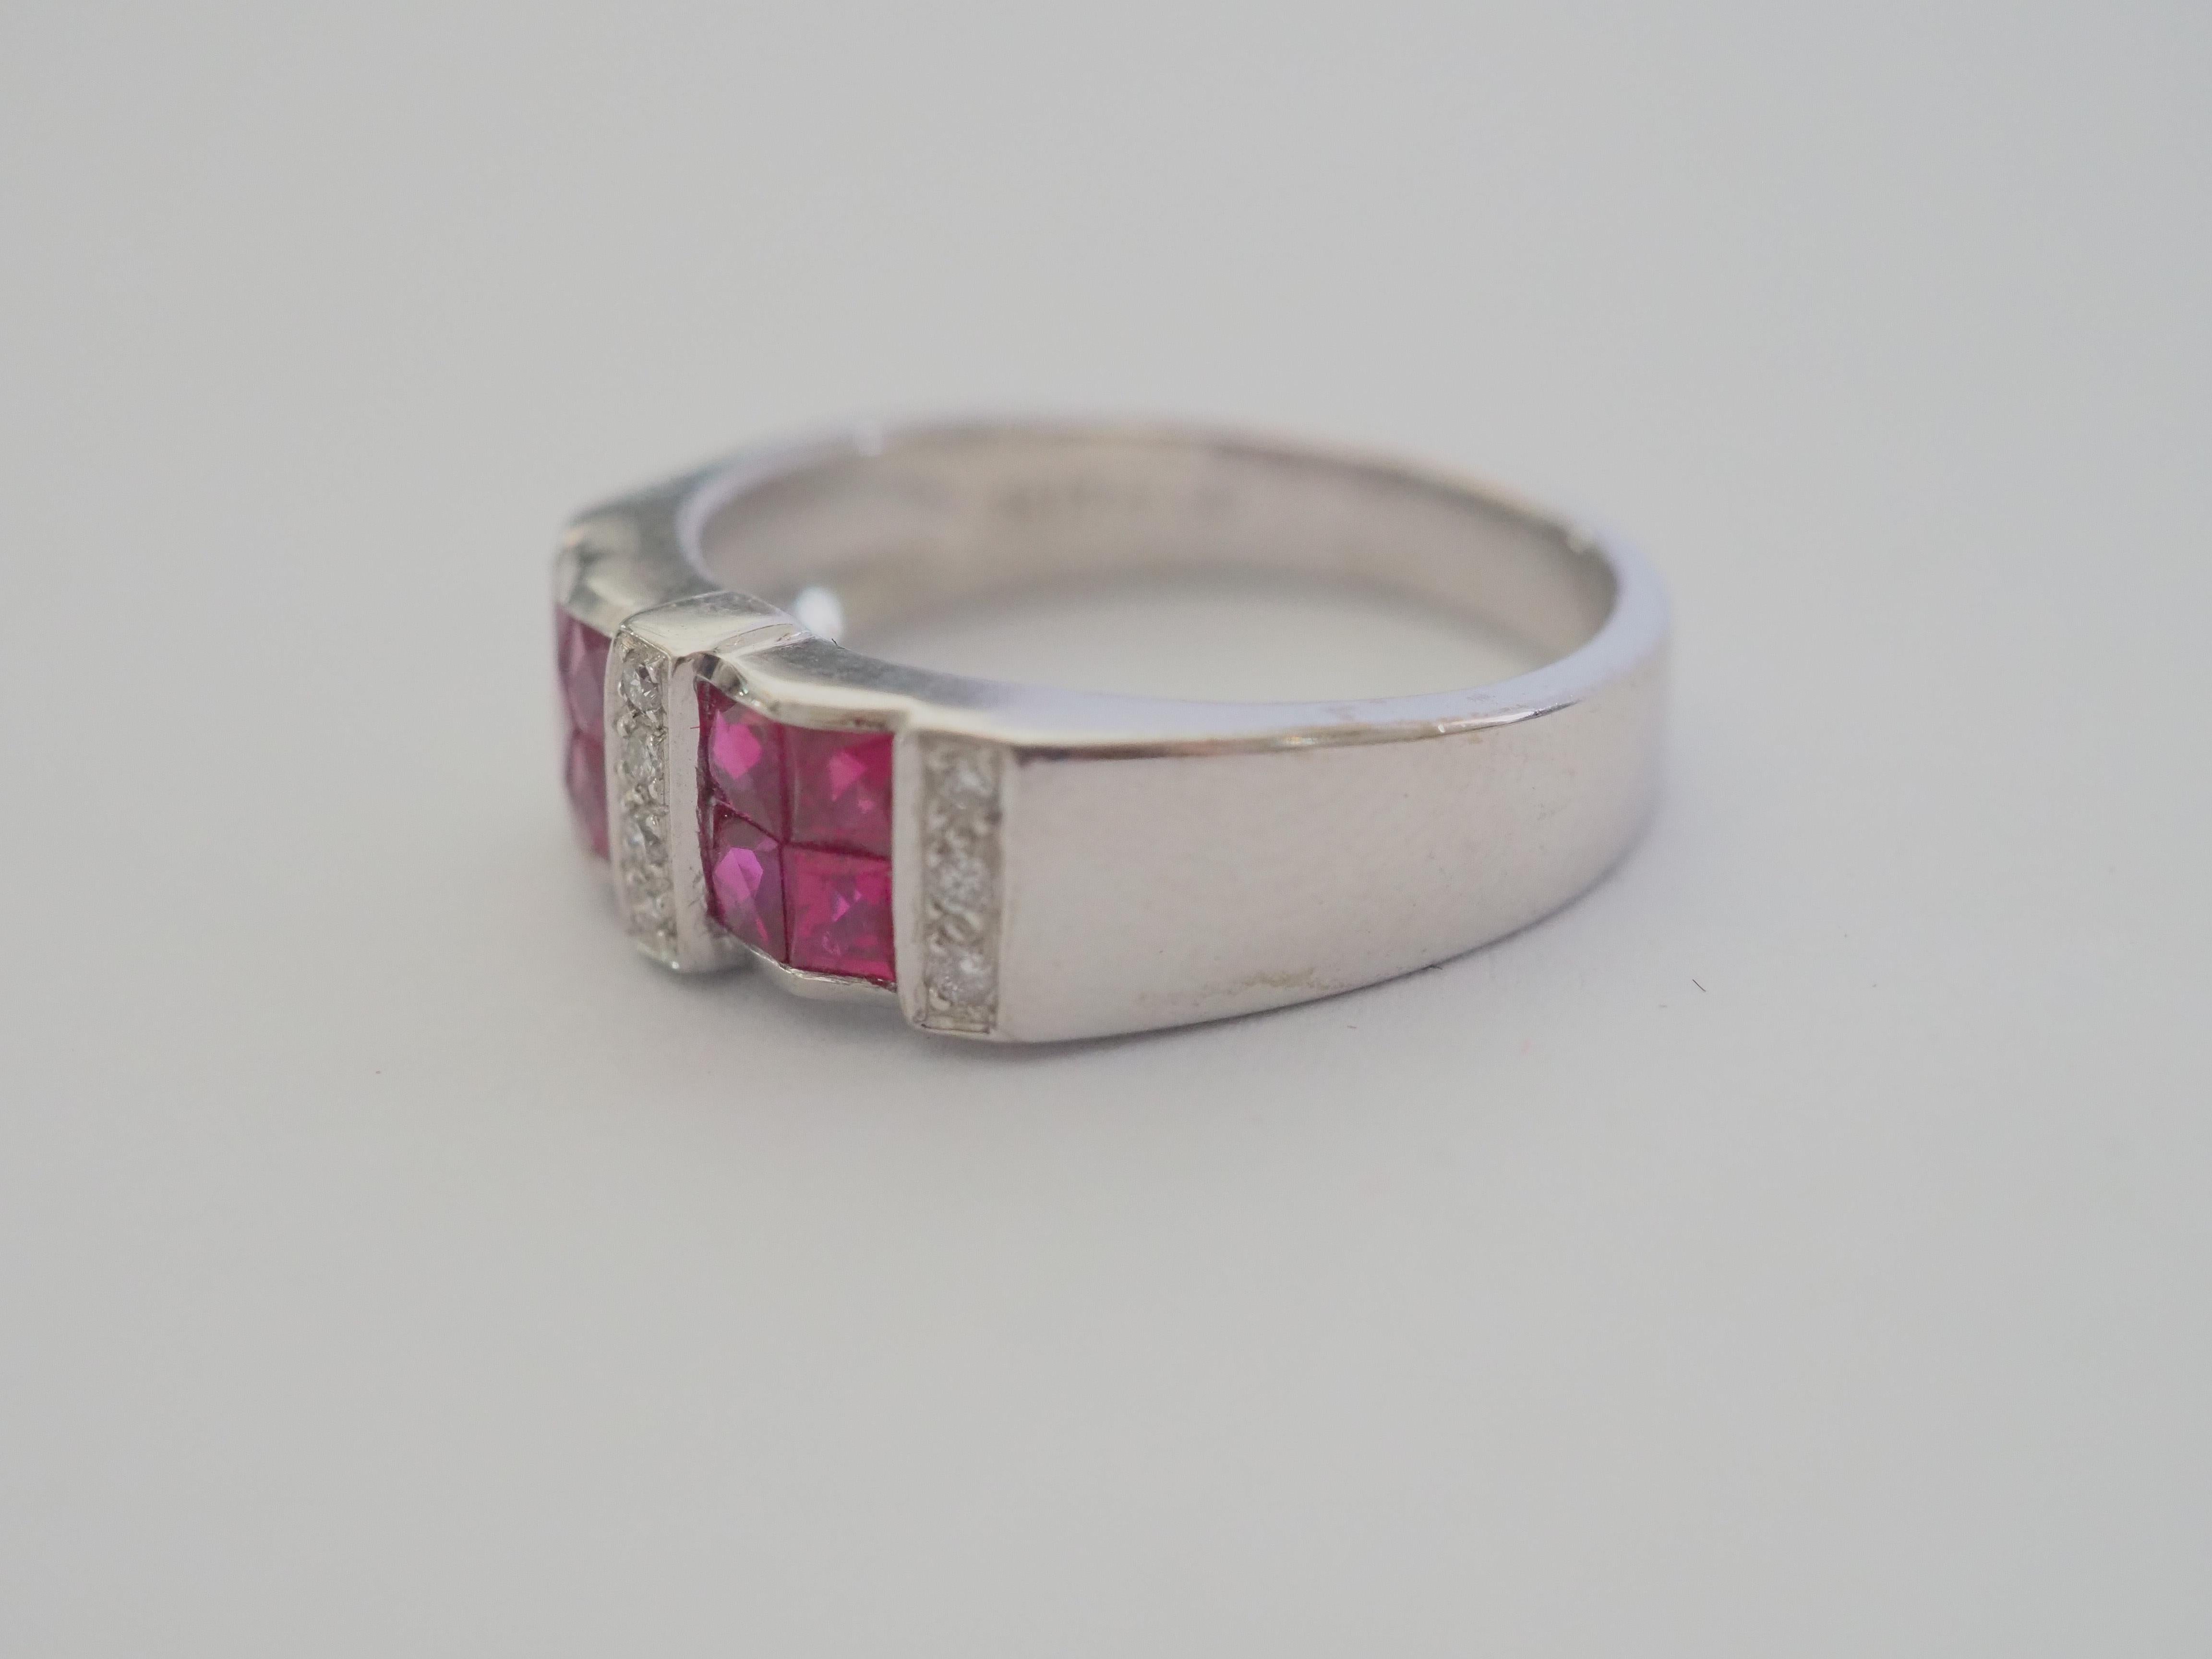 A gorgeous luxury Neo-vintage chunky band ring that is both suitable for all sexes. This ring has two rows of beautiful Thai rubies and pave round diamonds channeled nicely into the band. The square cut rubies have a beautiful pinkish red hue. And